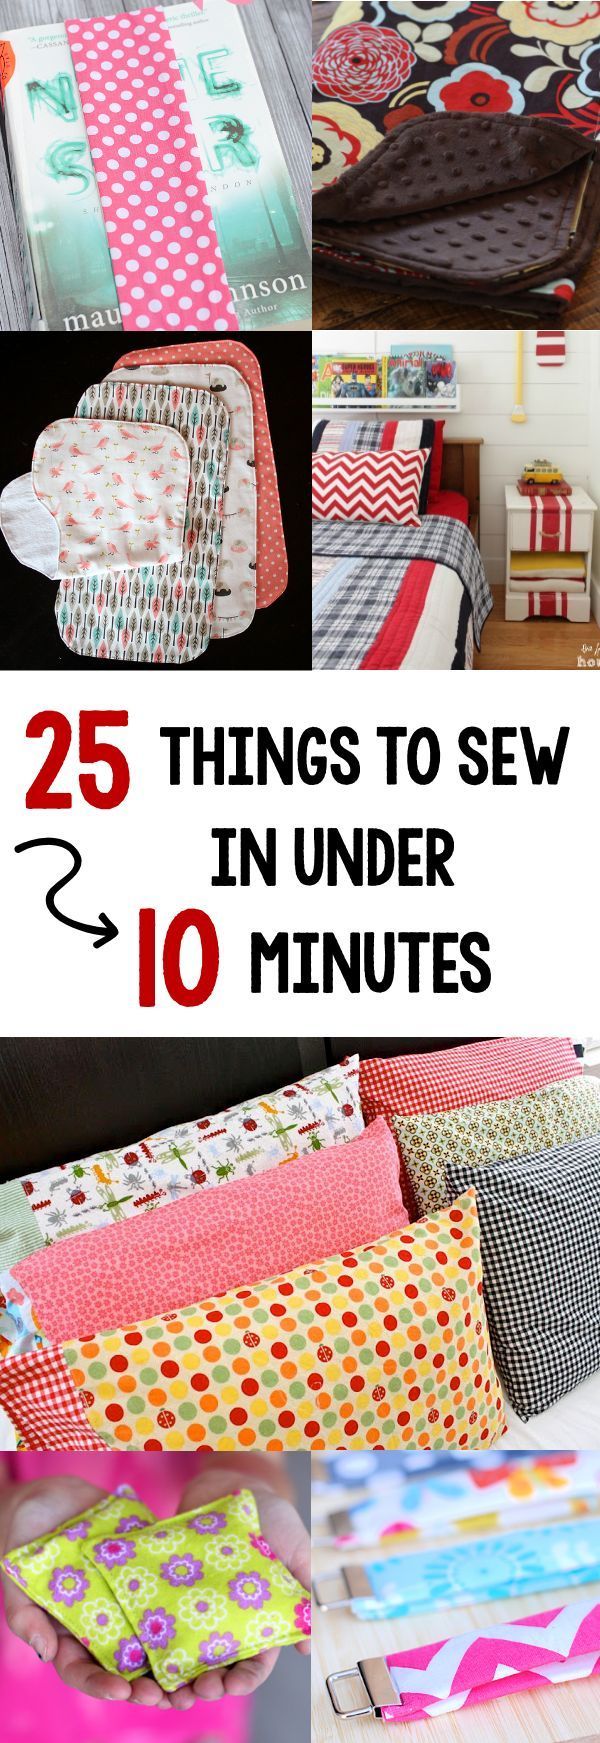 A list of 25 sewing projects that will take you just 10 minutes to sew! Perfect for when youre itching to sew but just have a